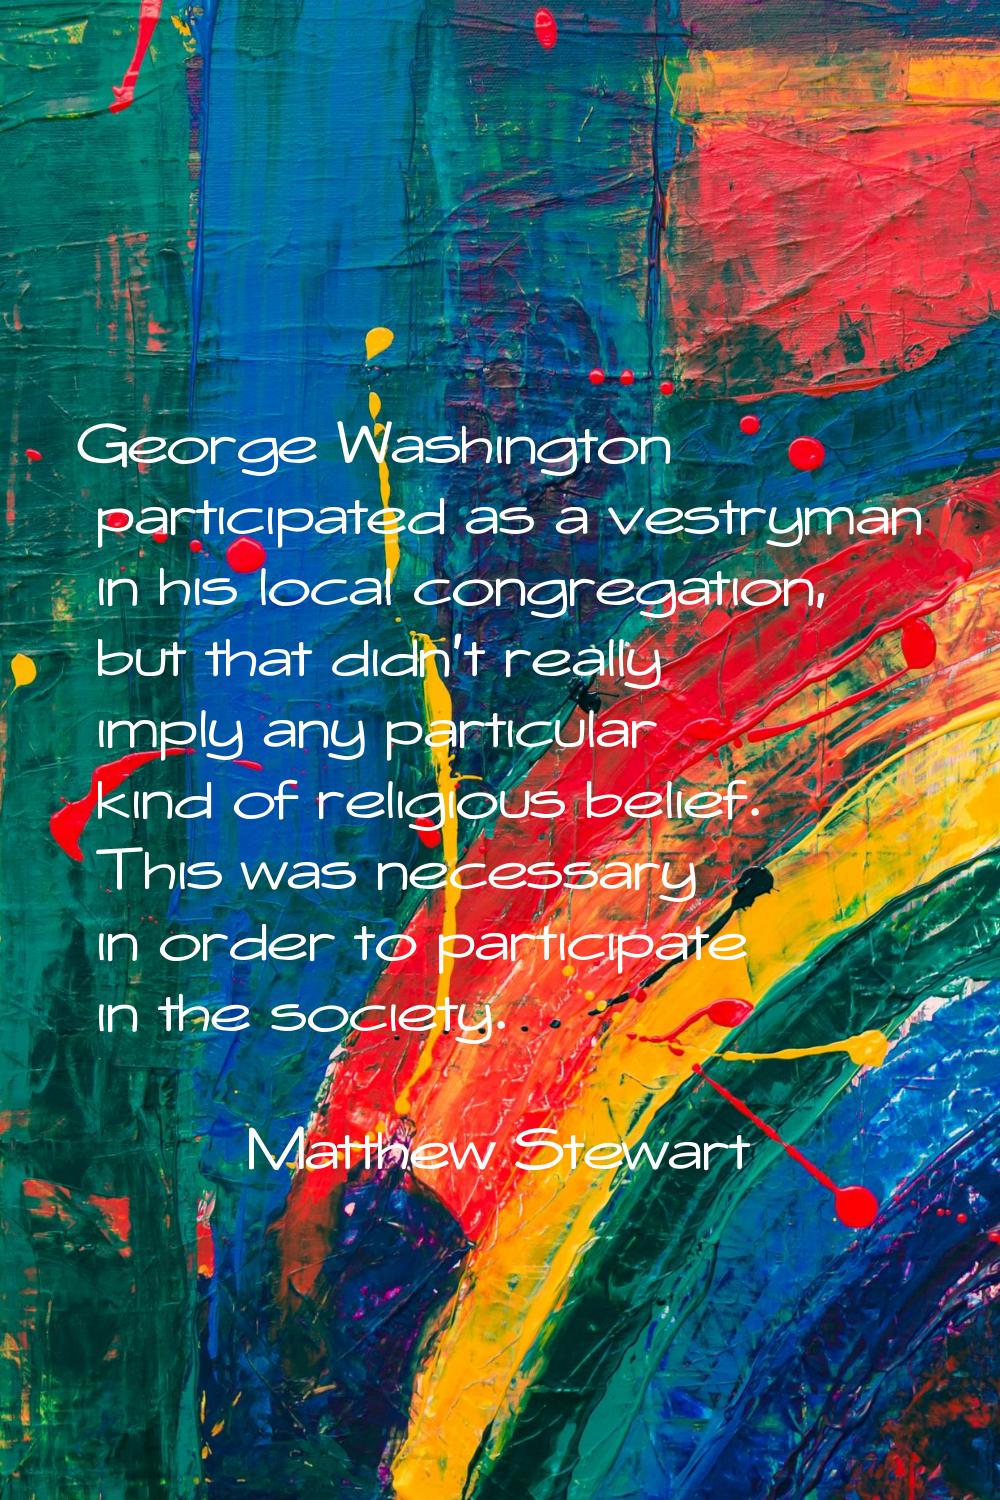 George Washington participated as a vestryman in his local congregation, but that didn't really imp